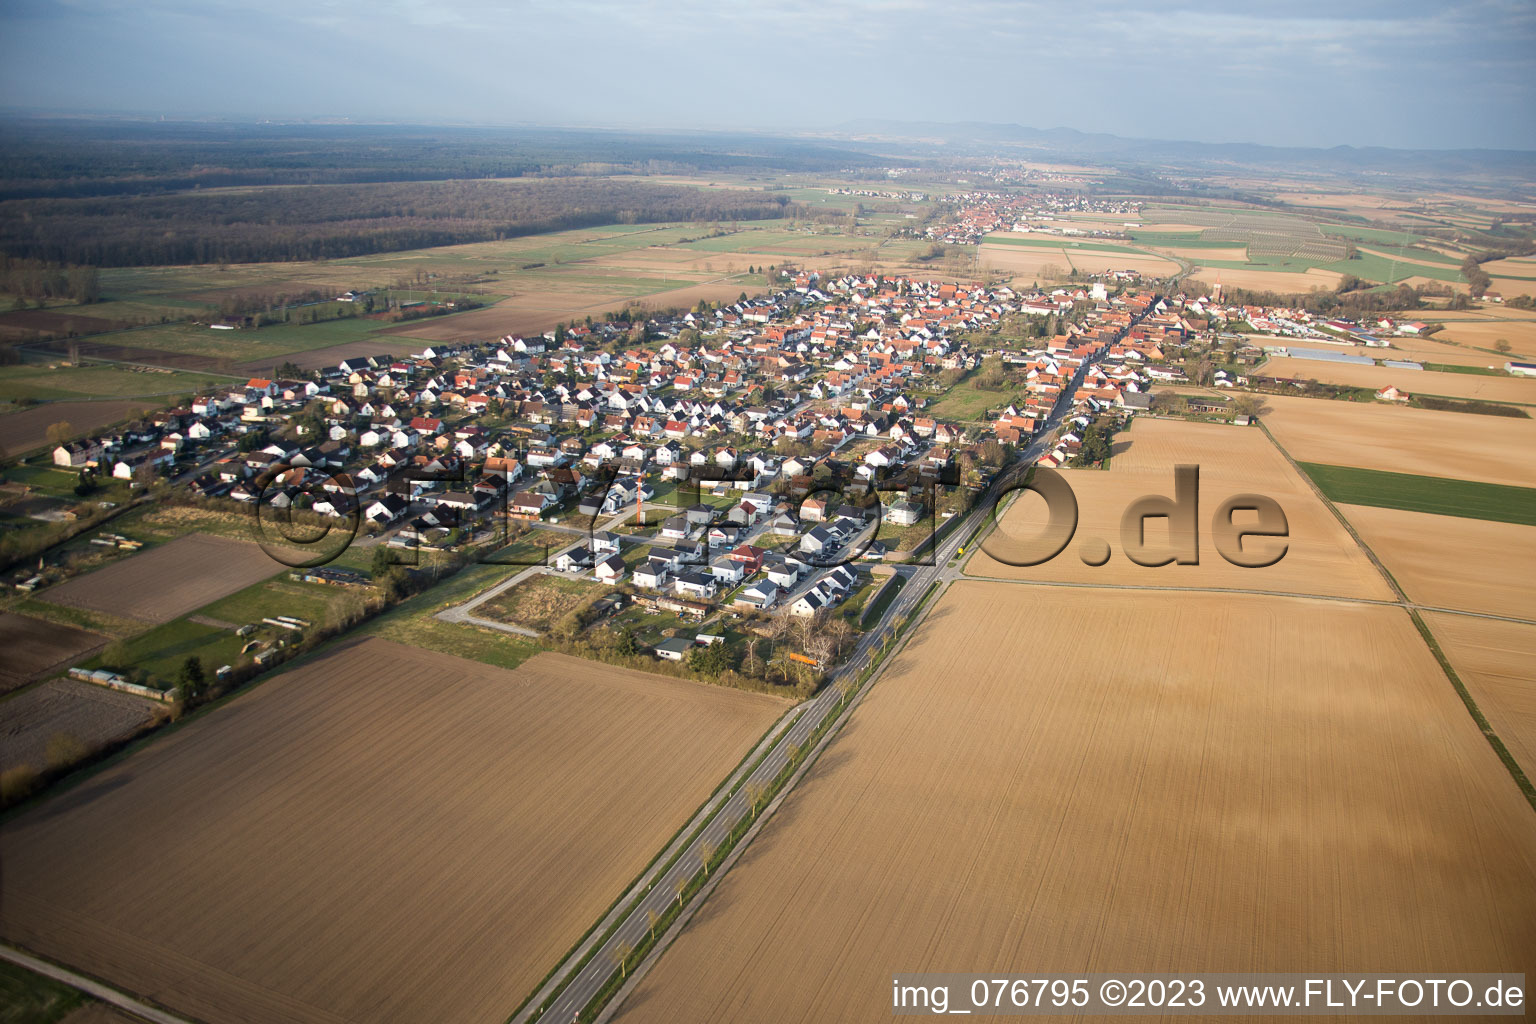 Minfeld in the state Rhineland-Palatinate, Germany from a drone